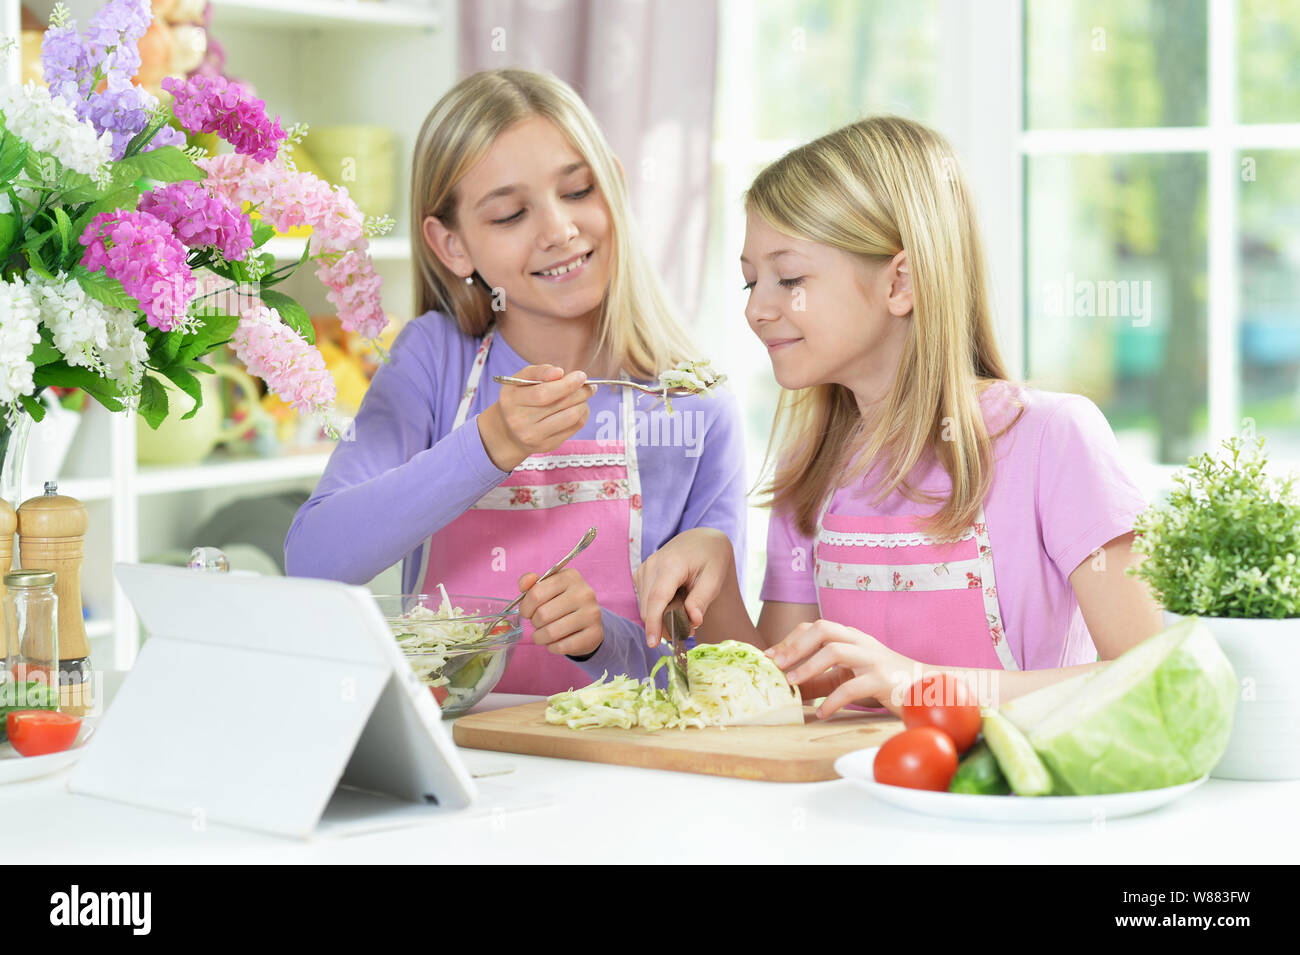 Two girls in pink aprons preparing salad Stock Photo